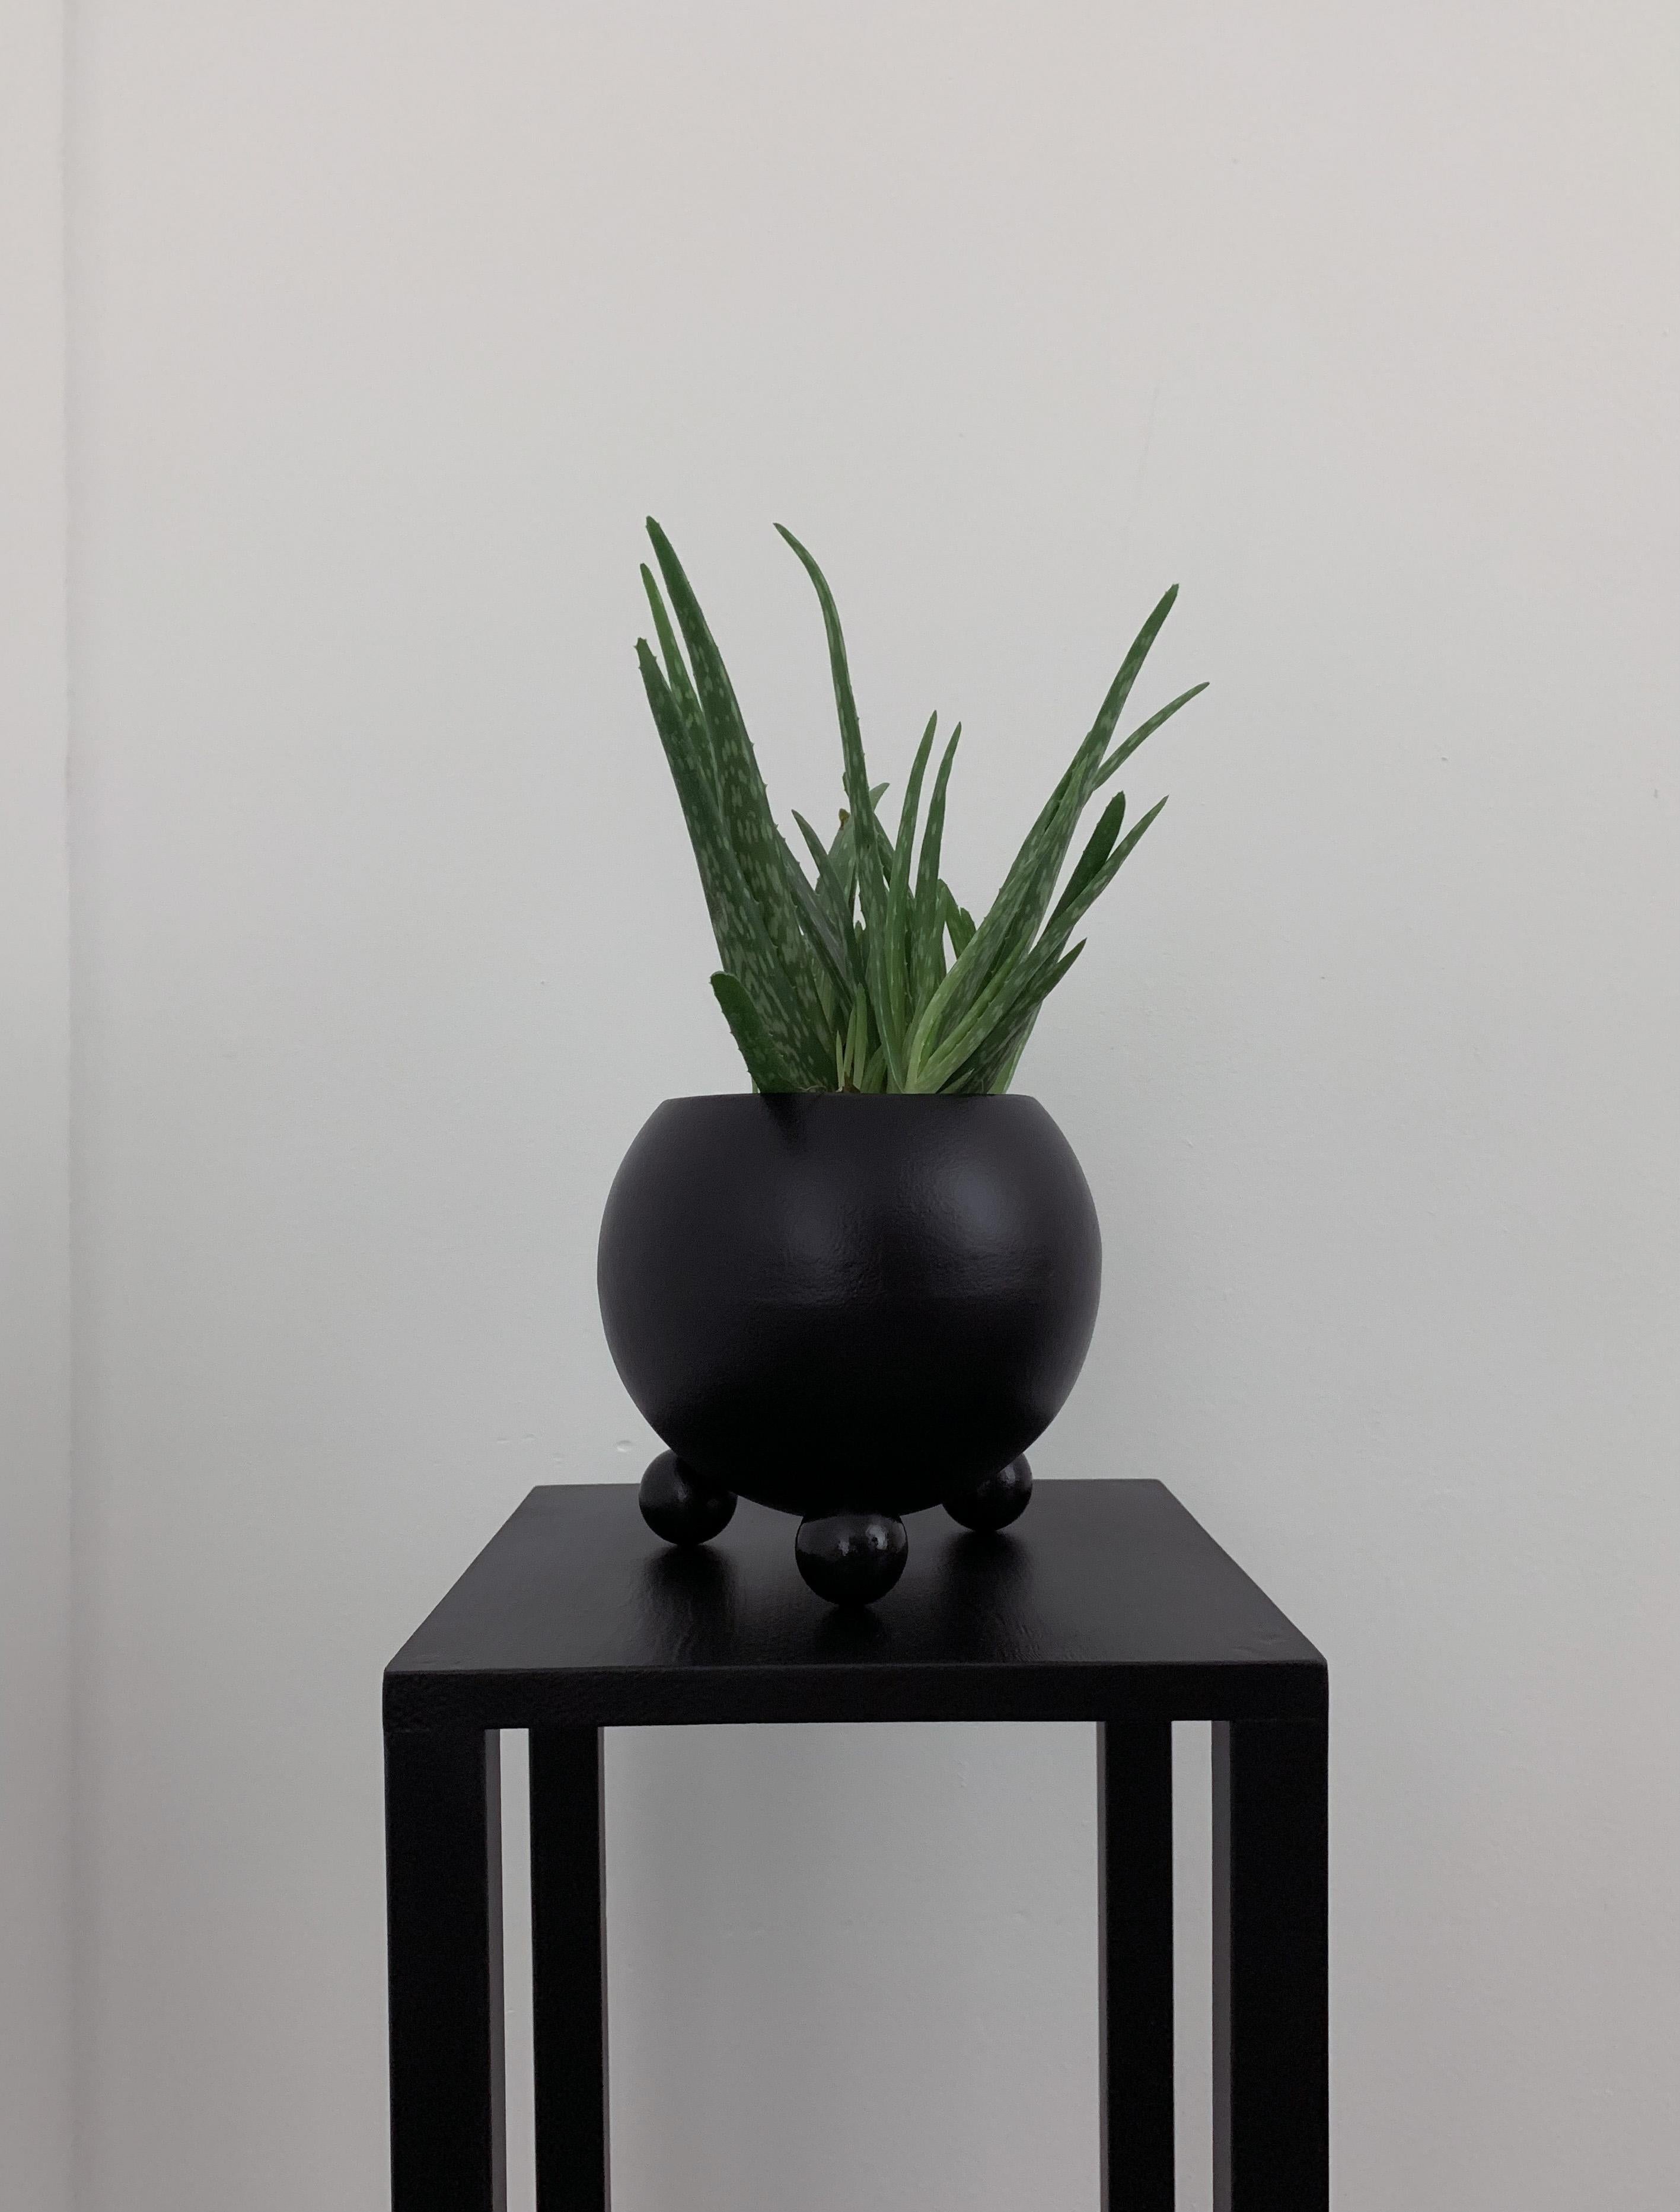 Arty decorative hand-made plant pot, black with black glossy legs - Black Abstract Sculpture by Rostyslav Kozhman